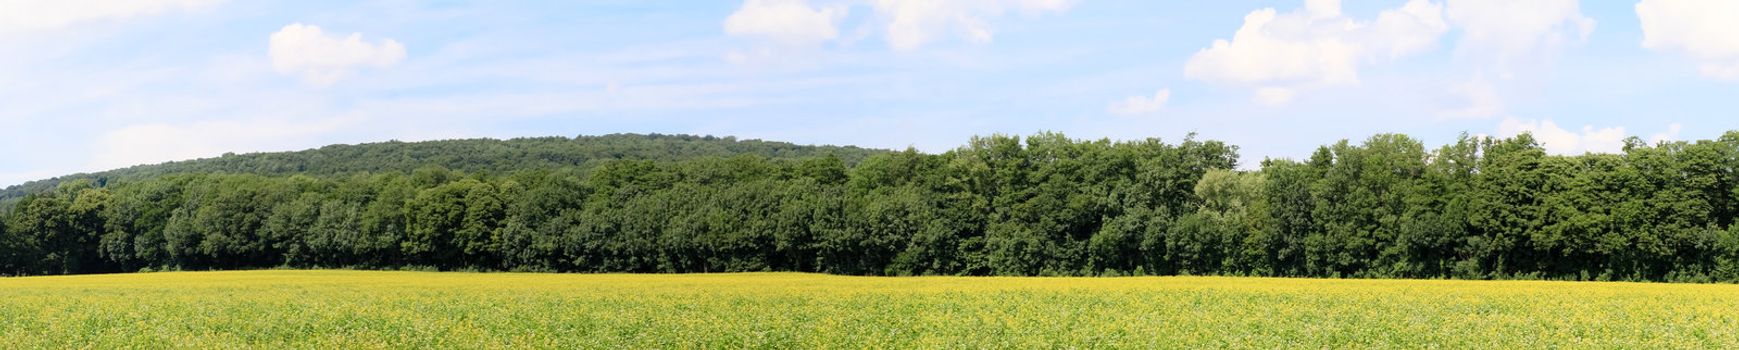 A panorama view of a rapeseed field in front of a forest under blue sky, close to Vienna